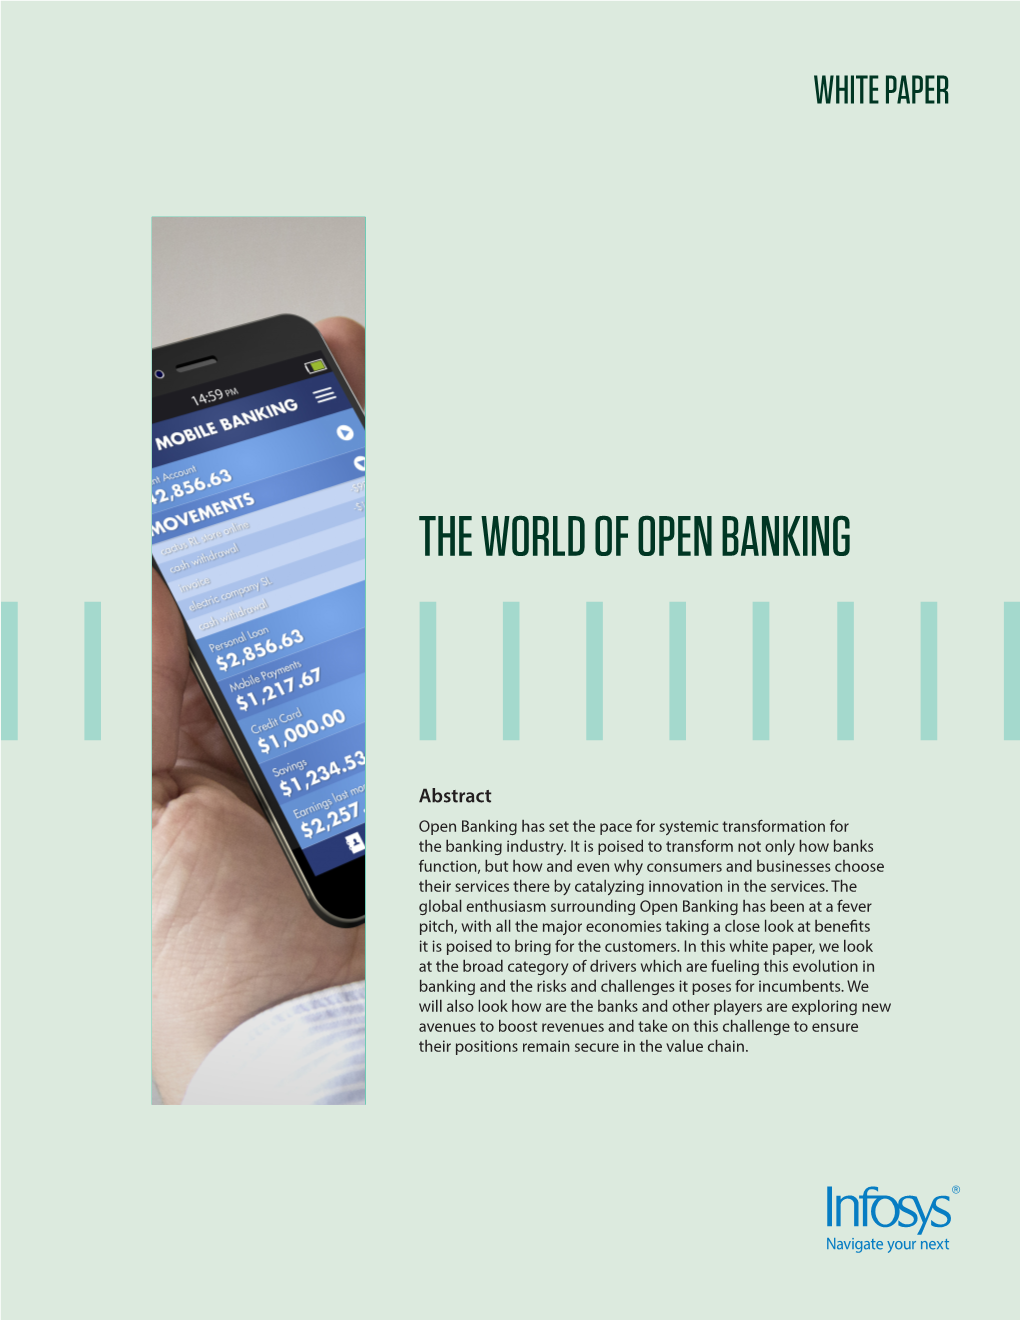 The World of Open Banking